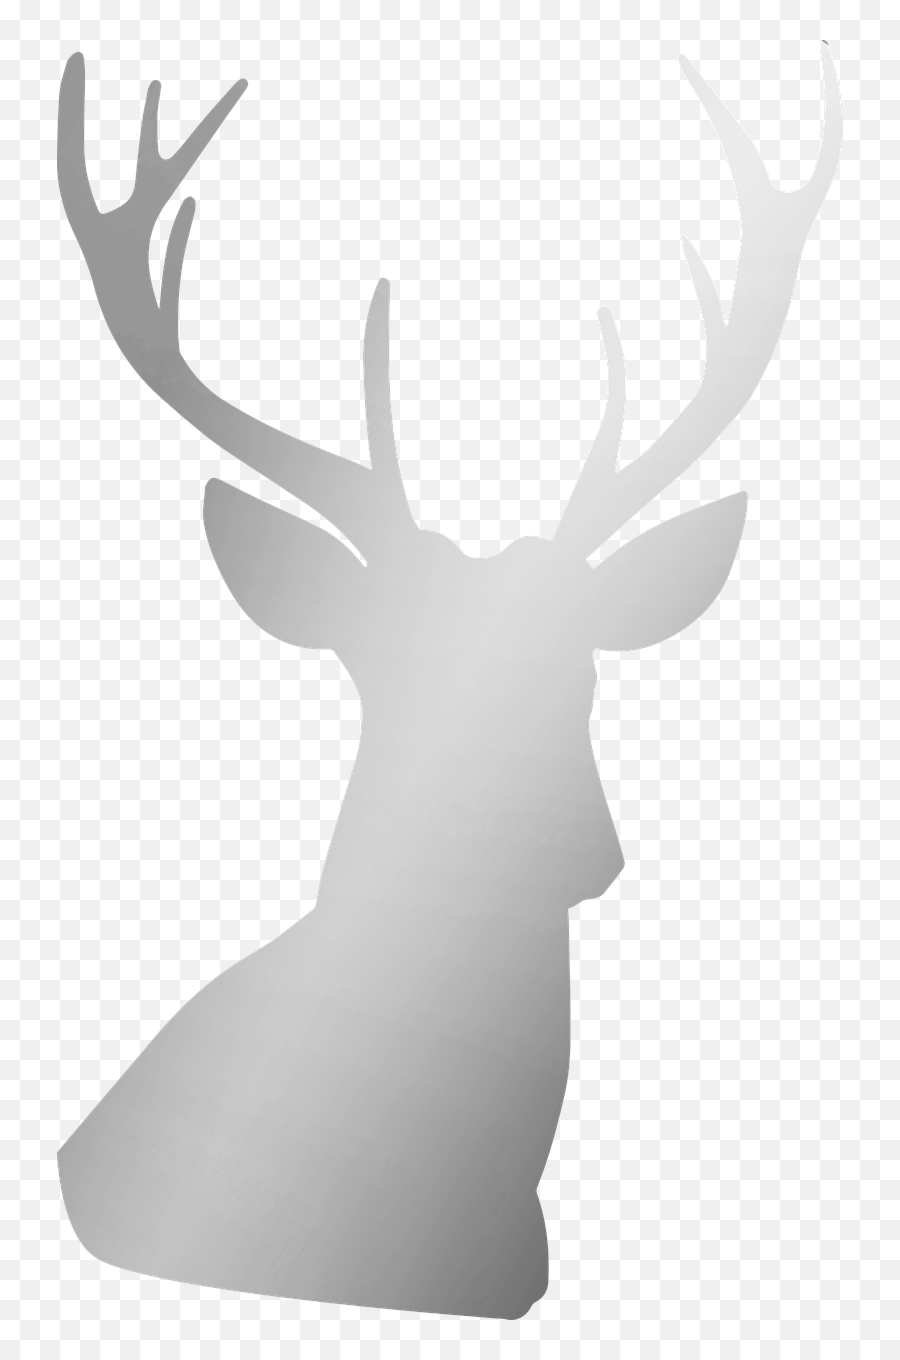 Silver Deer Antler - Free Image On Pixabay Silver Stag Png,Buck Png